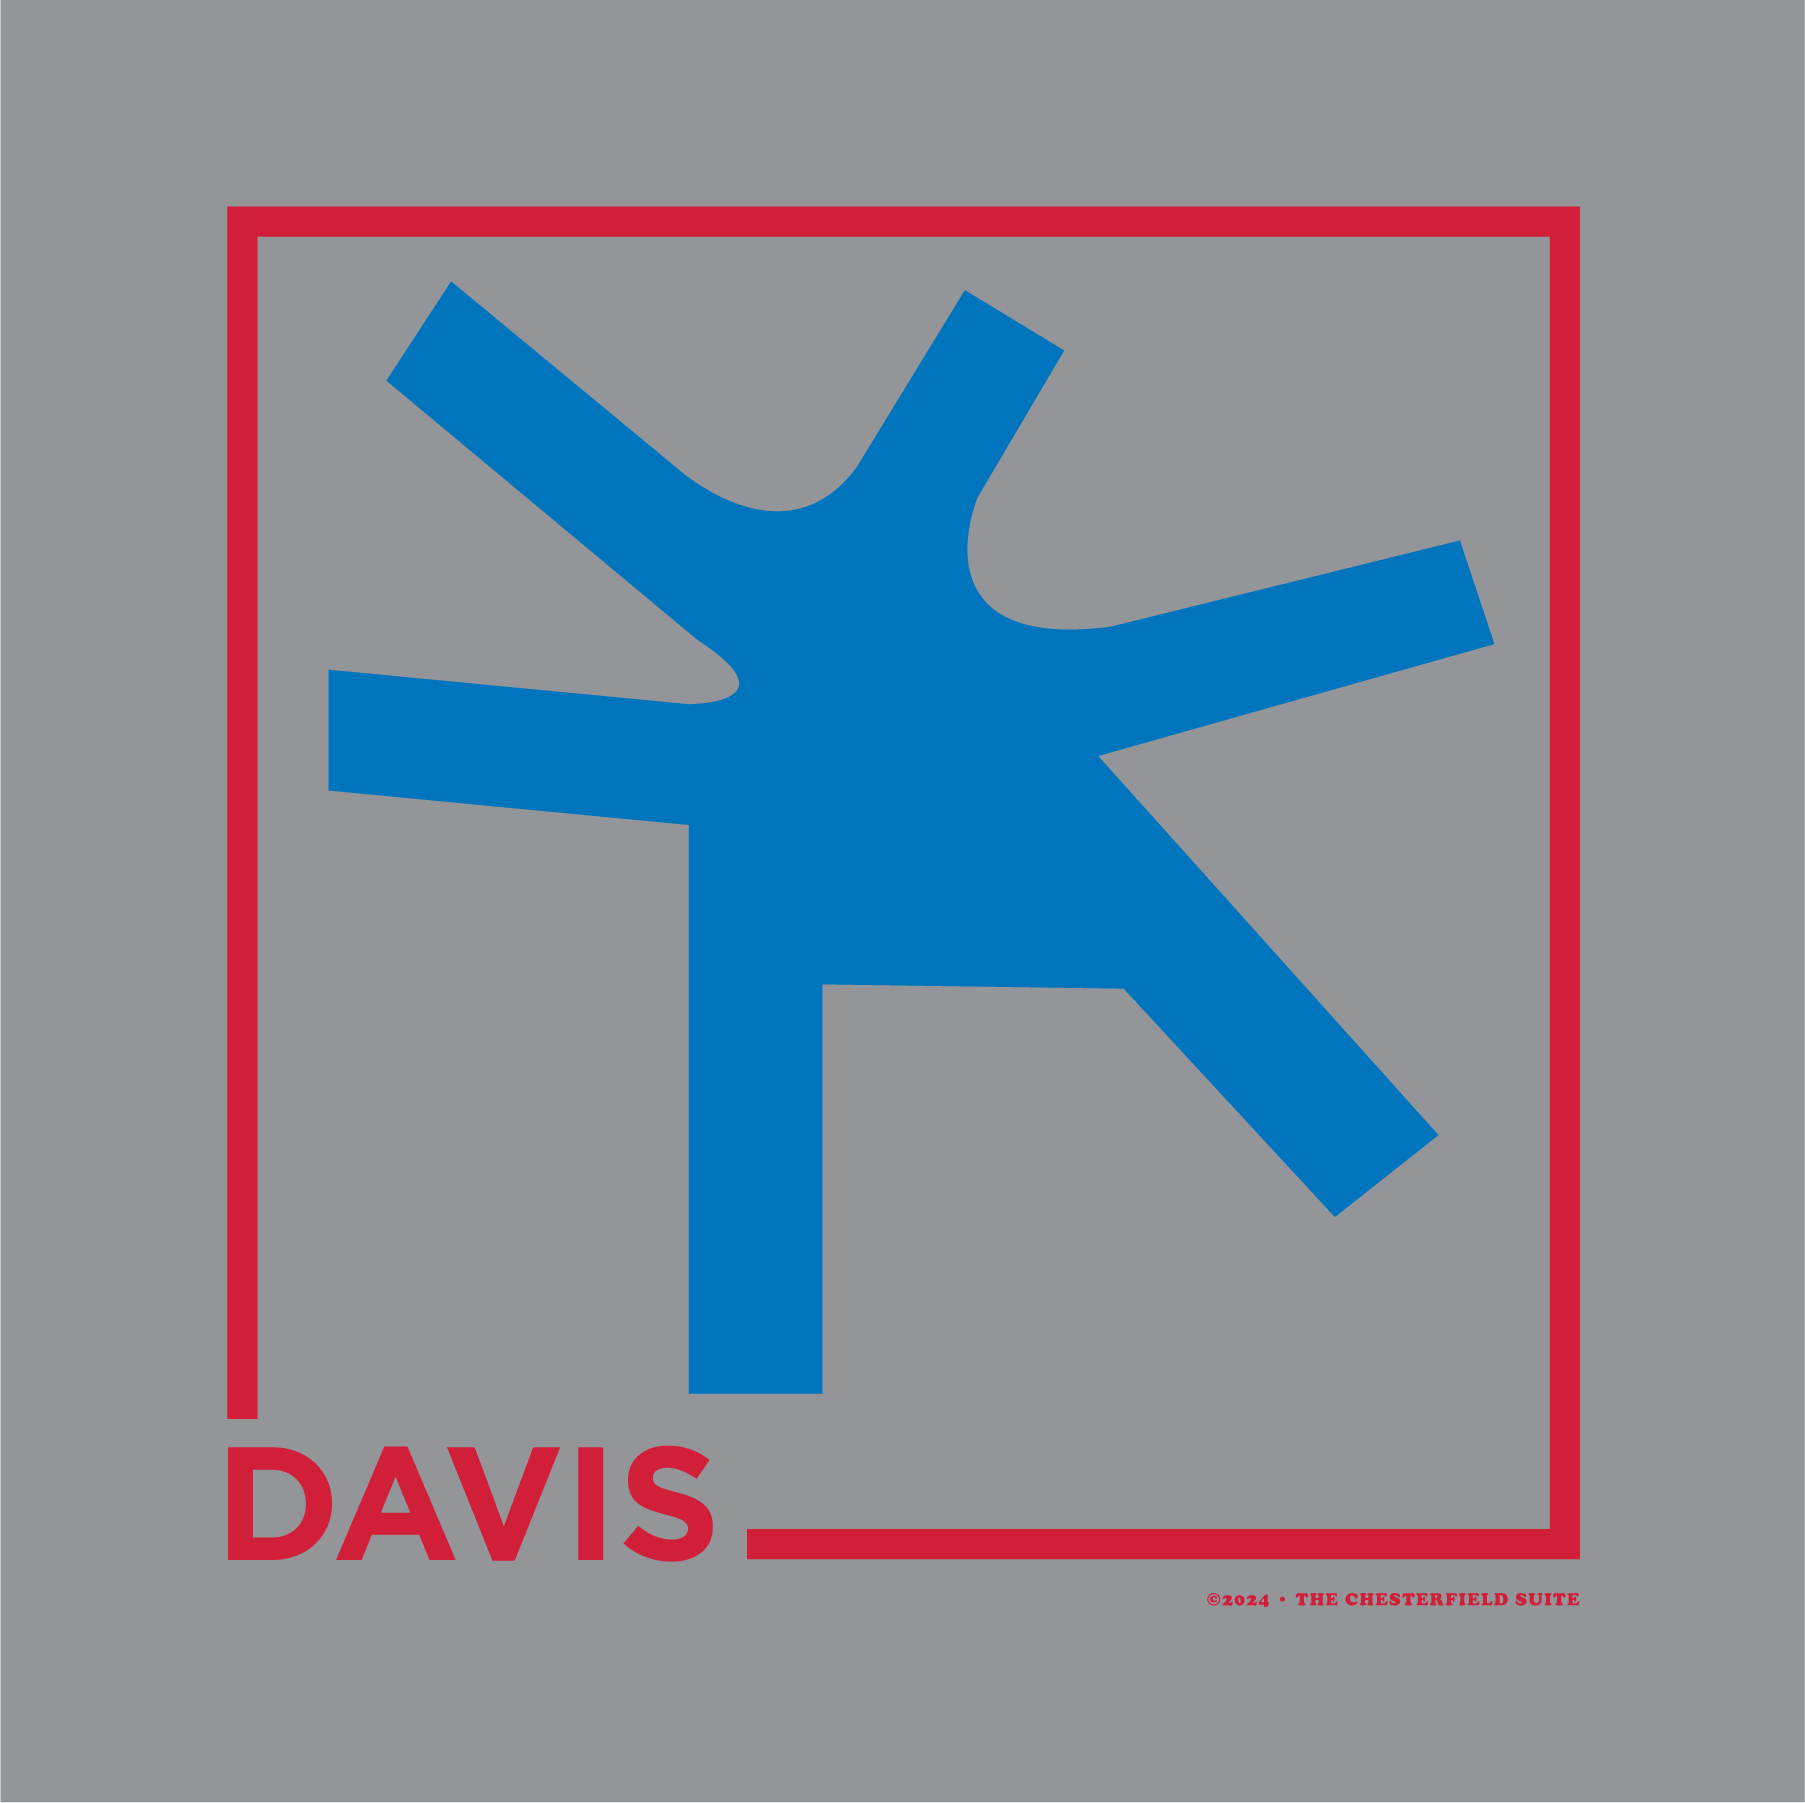 Grey design with the word Davis and a square in red, with the blue intersection